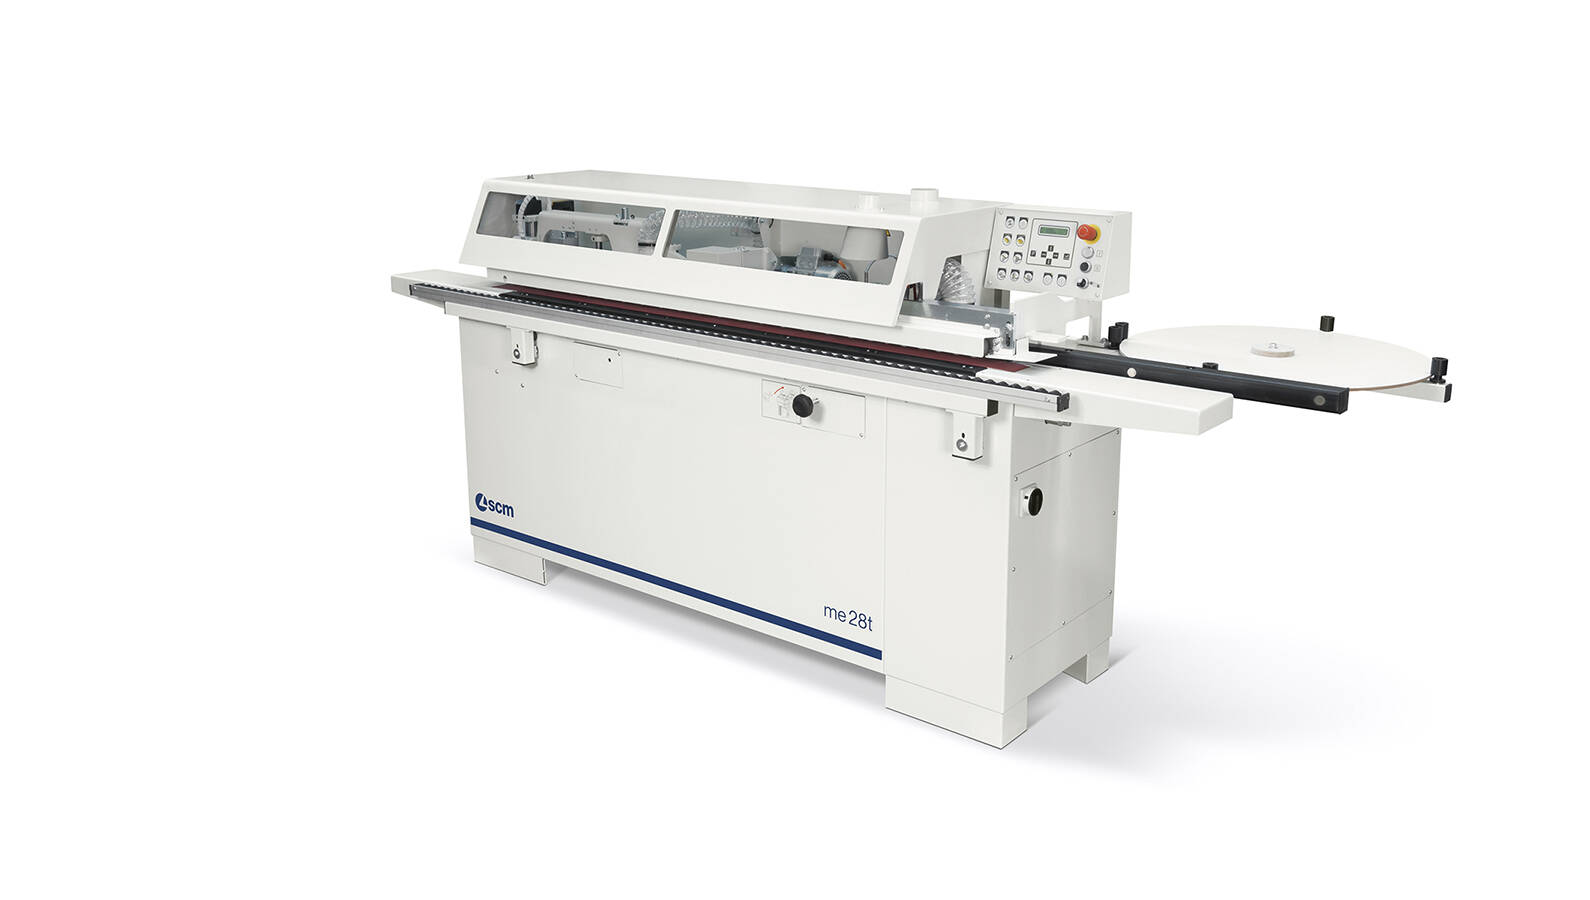 Joinery machines - Edge Banders - me 28t